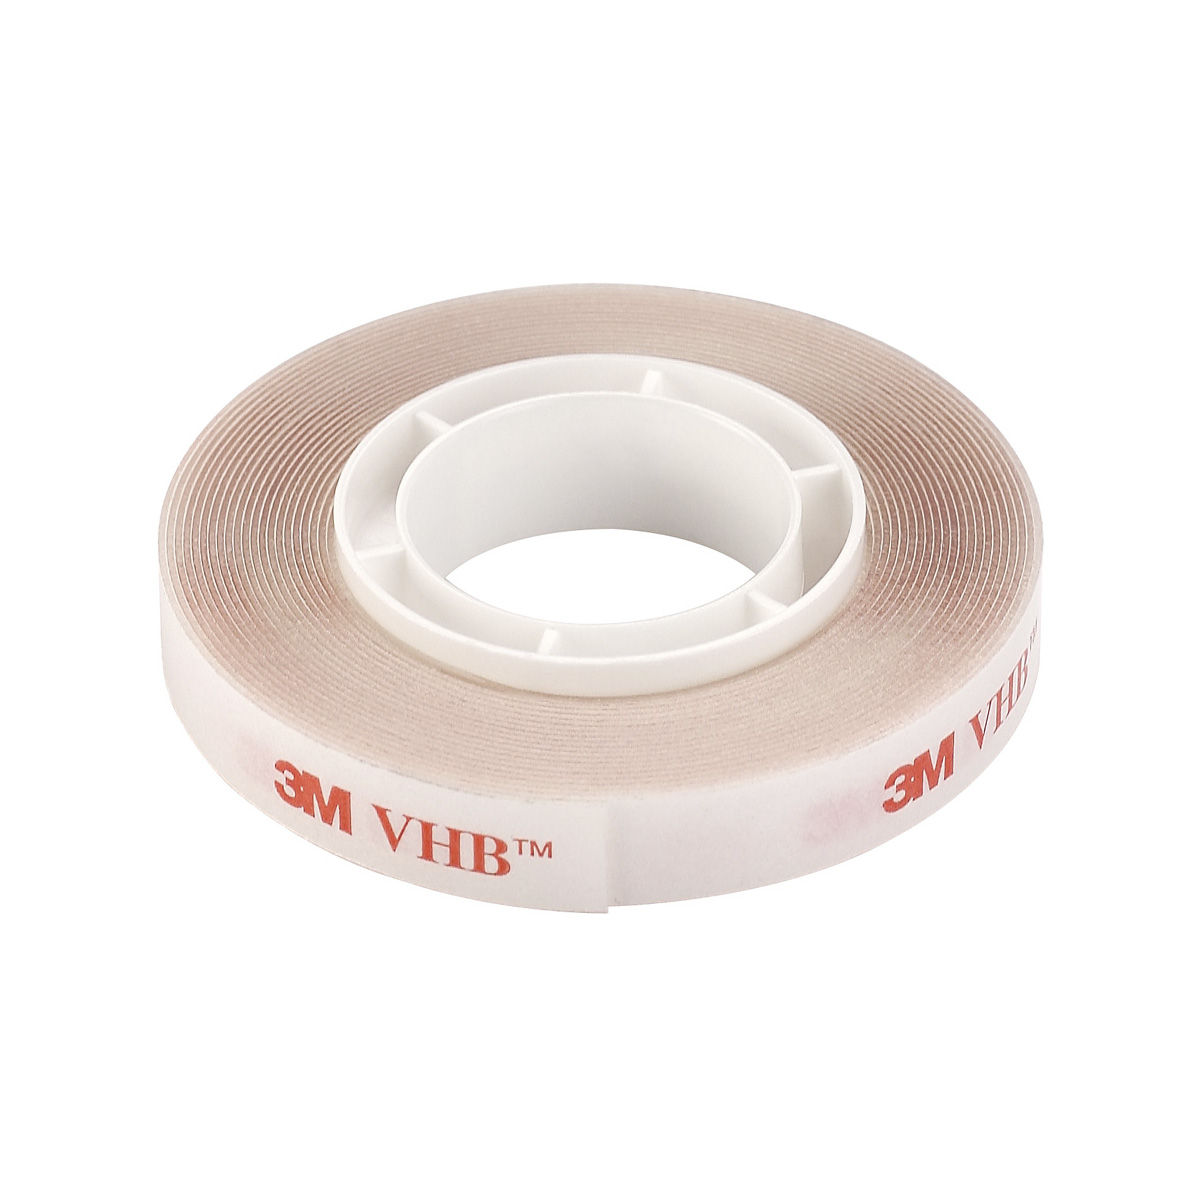 Double side adhesive tape 9mm, transparent, 3m